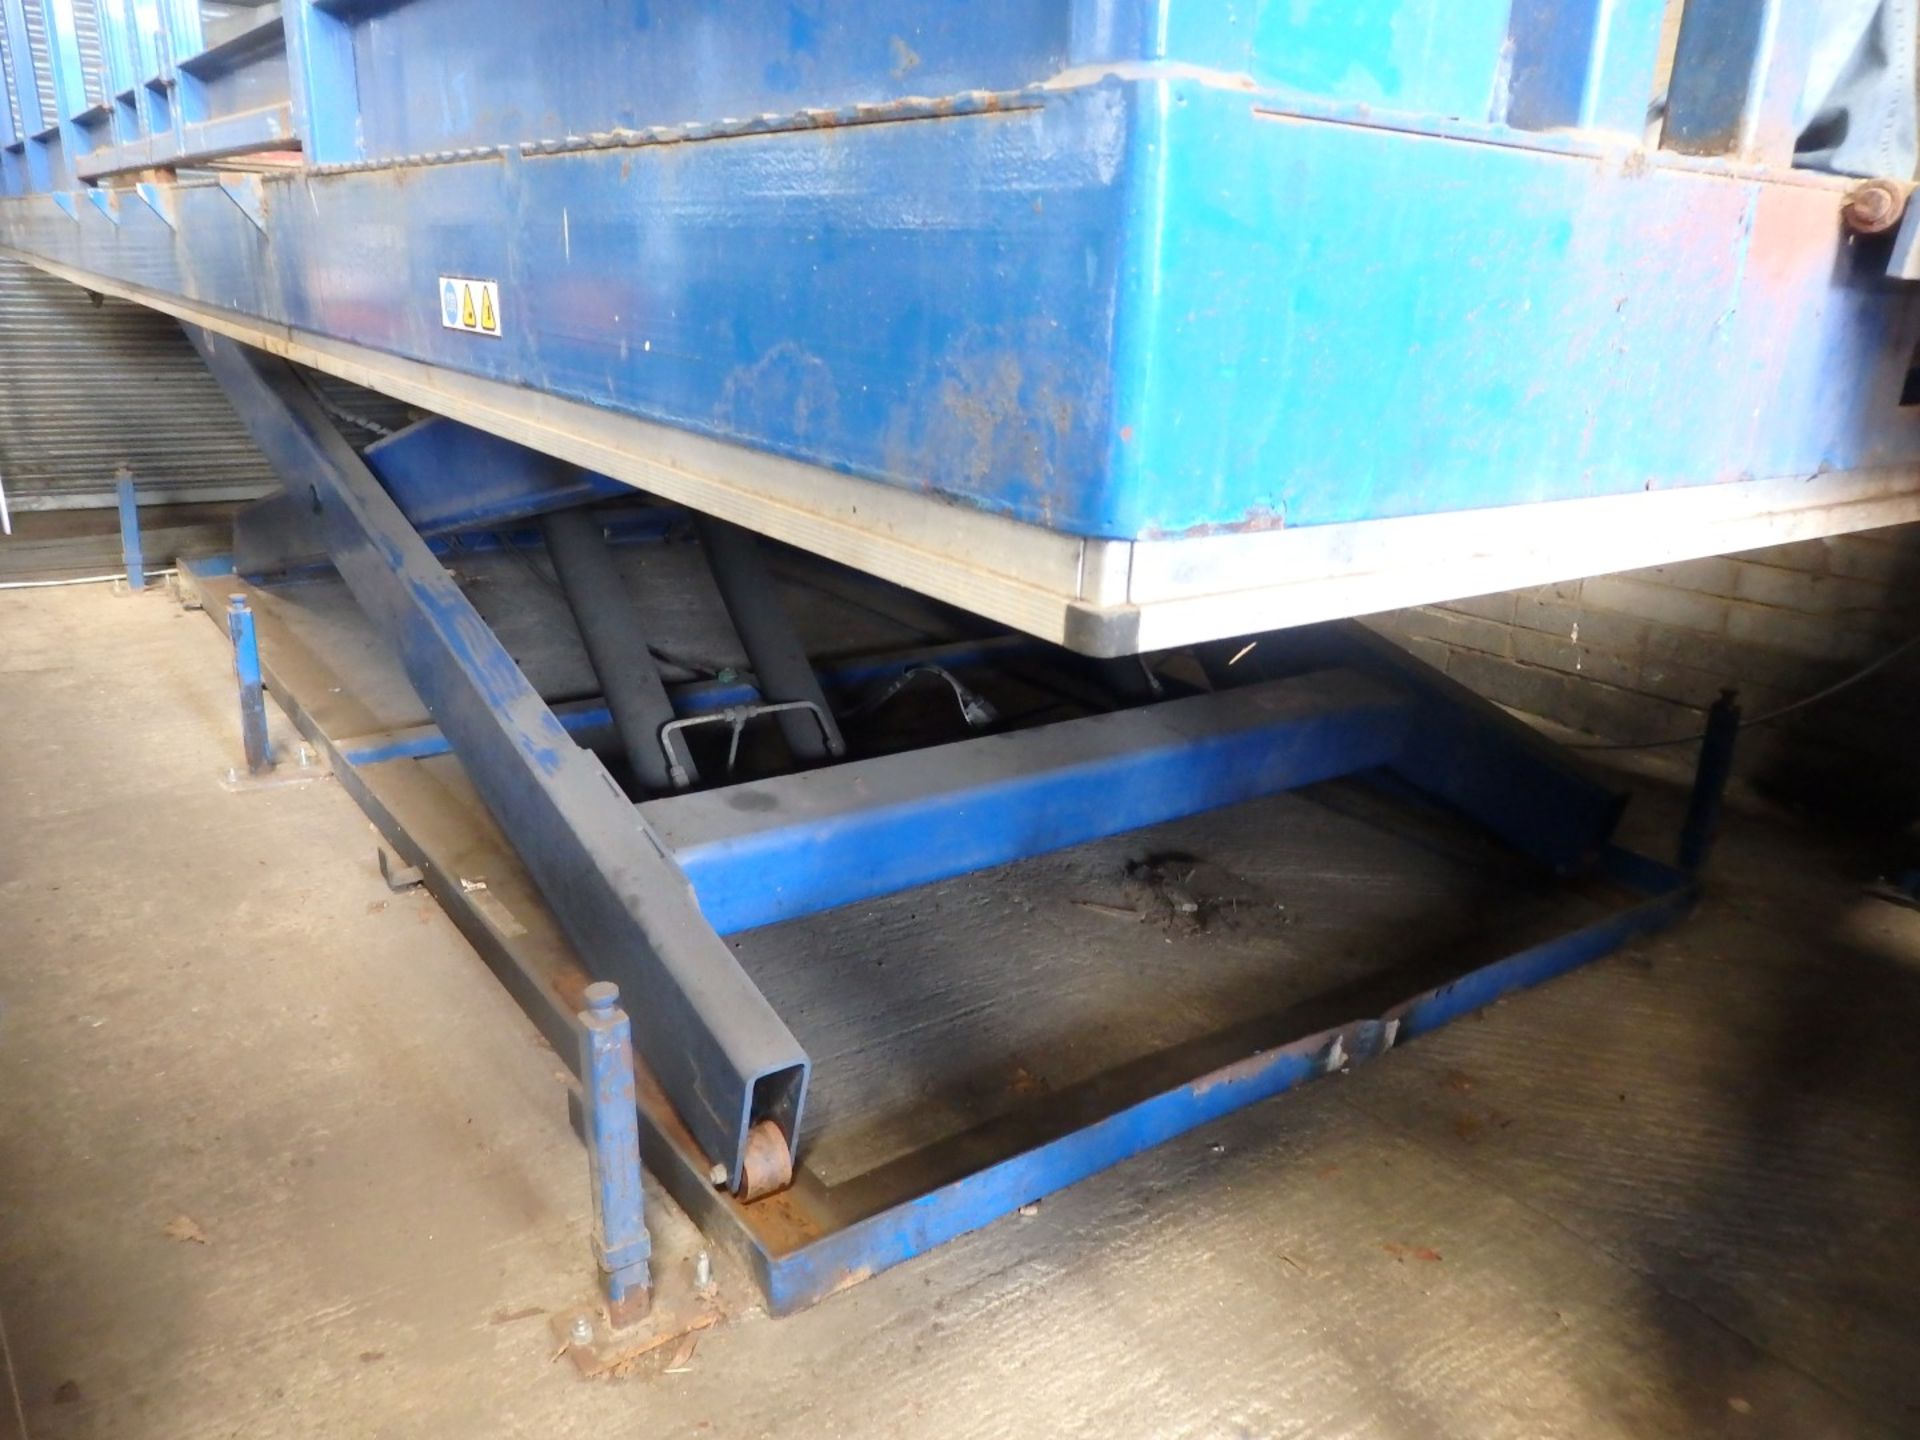 1 x Translyft Loading Bay Hydraulioc Scissor Docking Lift - CL057 - 10ft Lifting Height - 116 Inches - Image 2 of 9